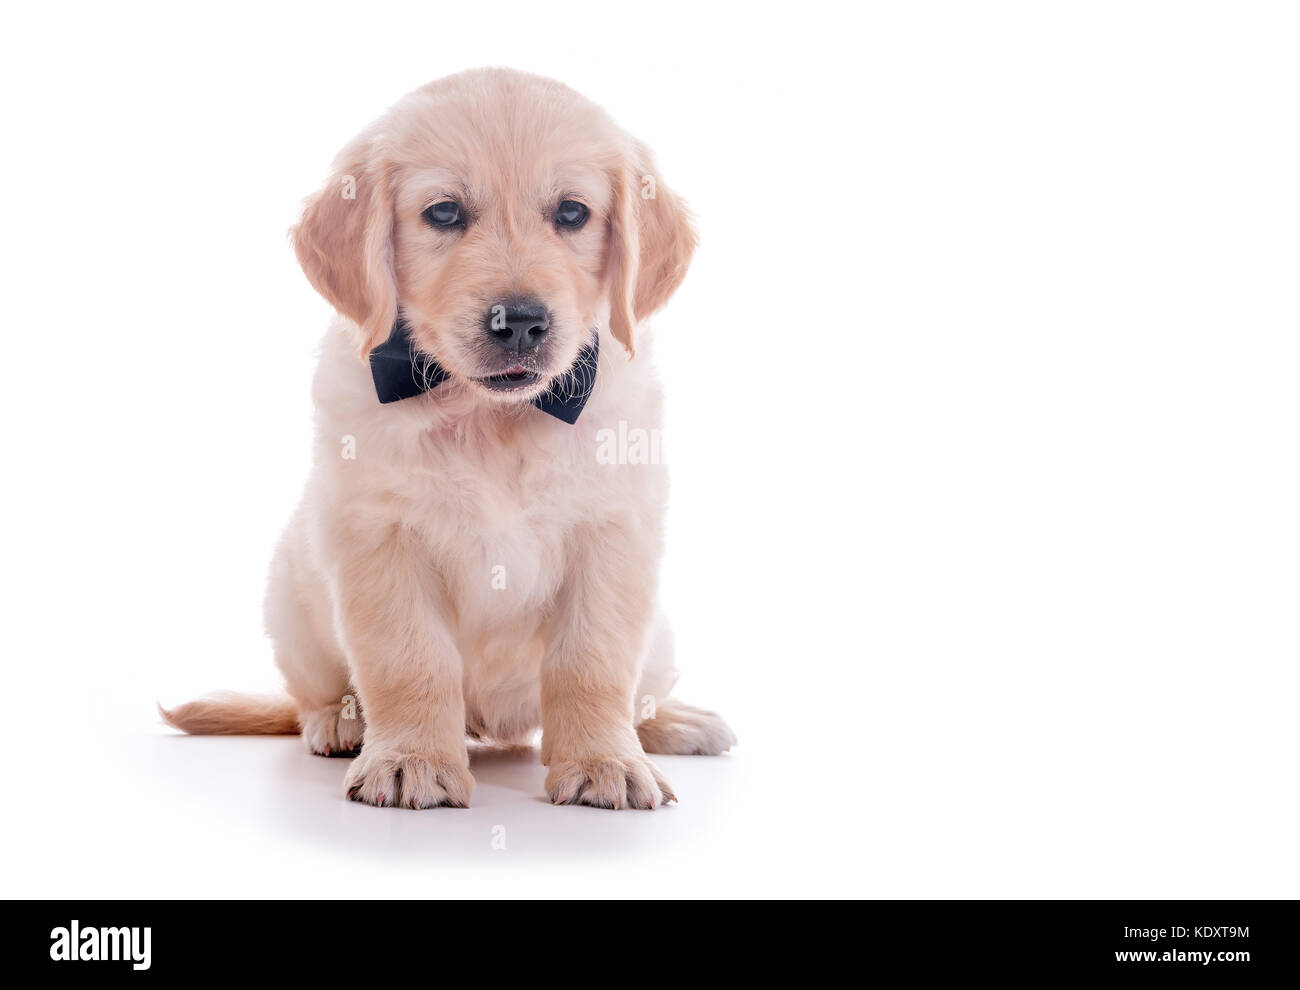 Sitting puppy of golden retriever with bow tie over white background, shallow focus Stock Photo